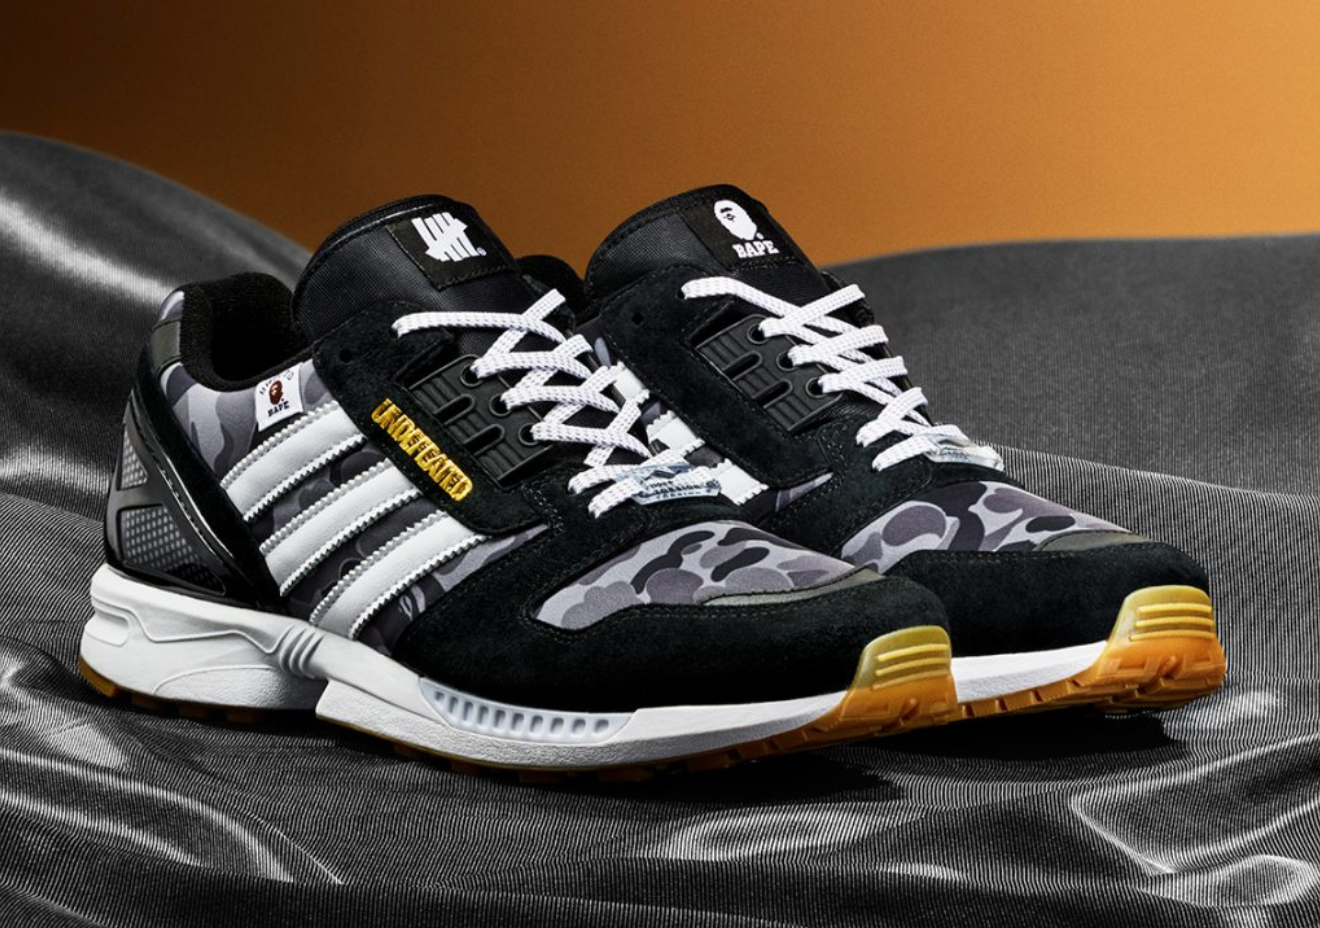 Bape X Undefeated X Adidas Collaborate On Zx 8000 Silhouette